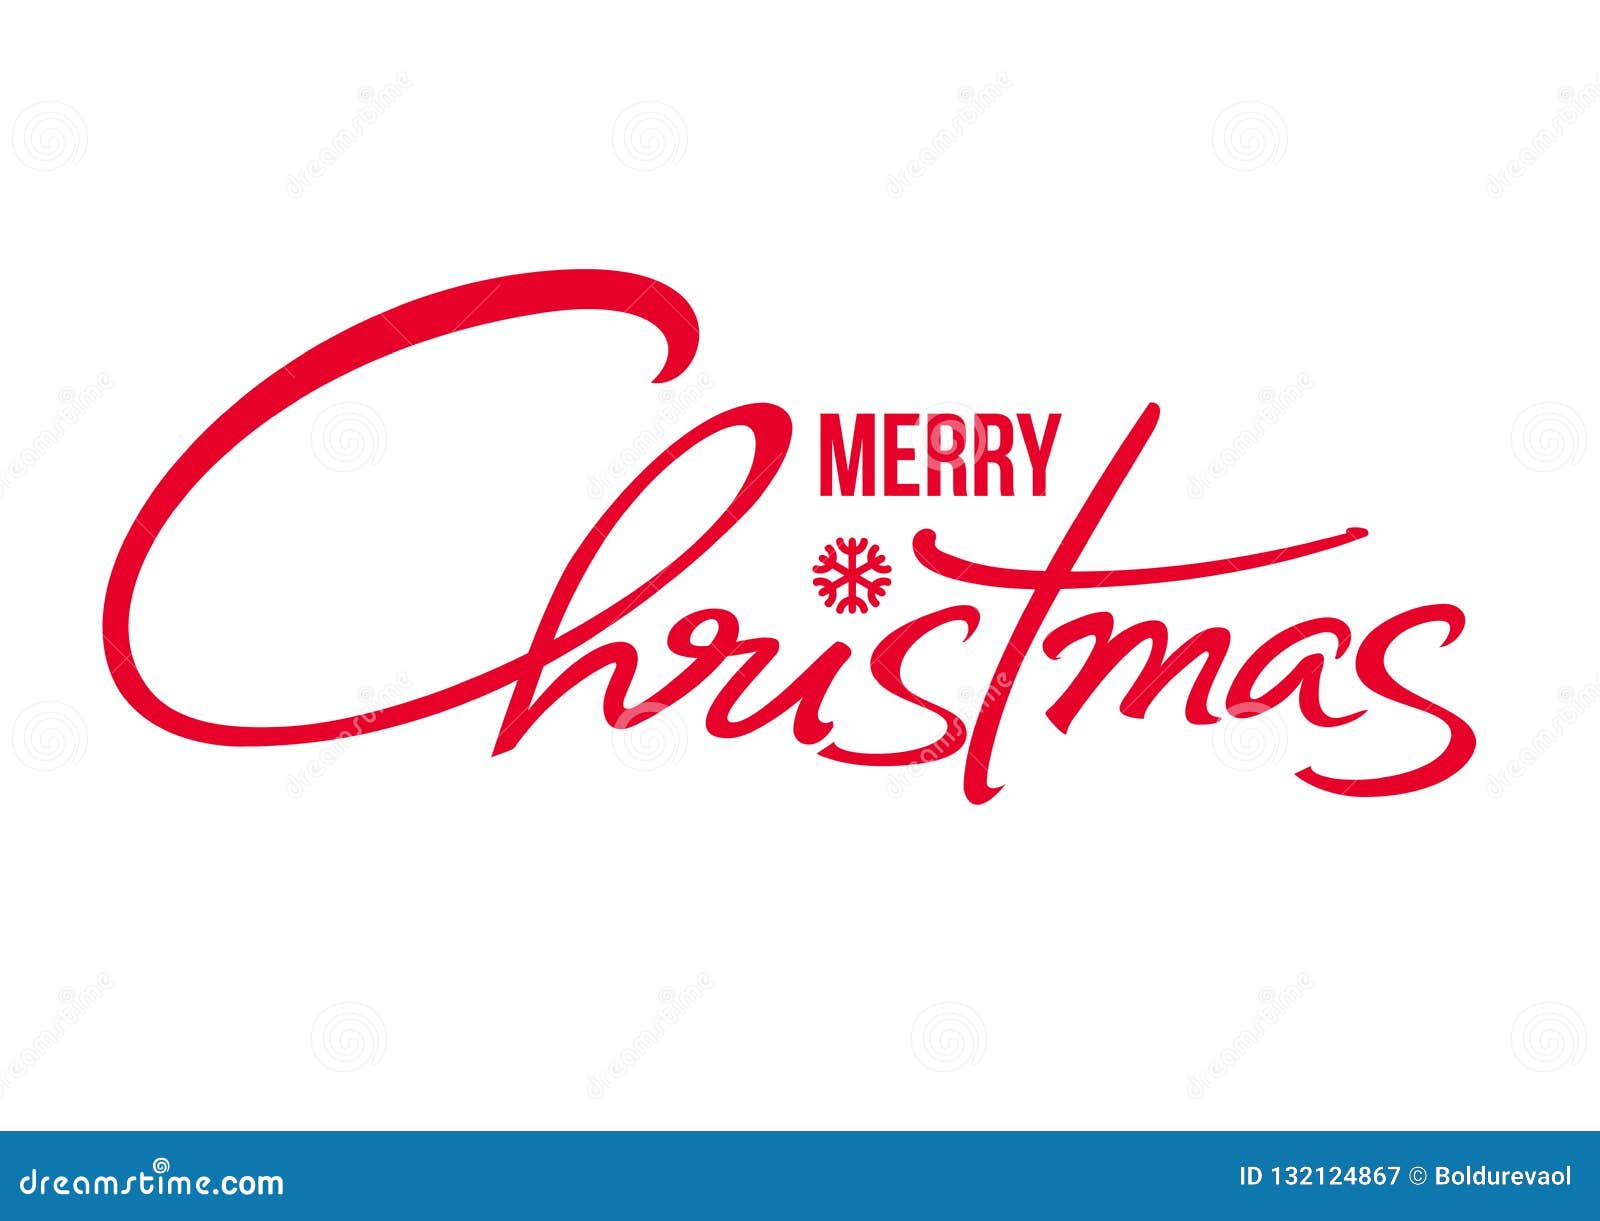 merry christmas text. calligraphic hand drawn lettering .  typography red letters  on white.